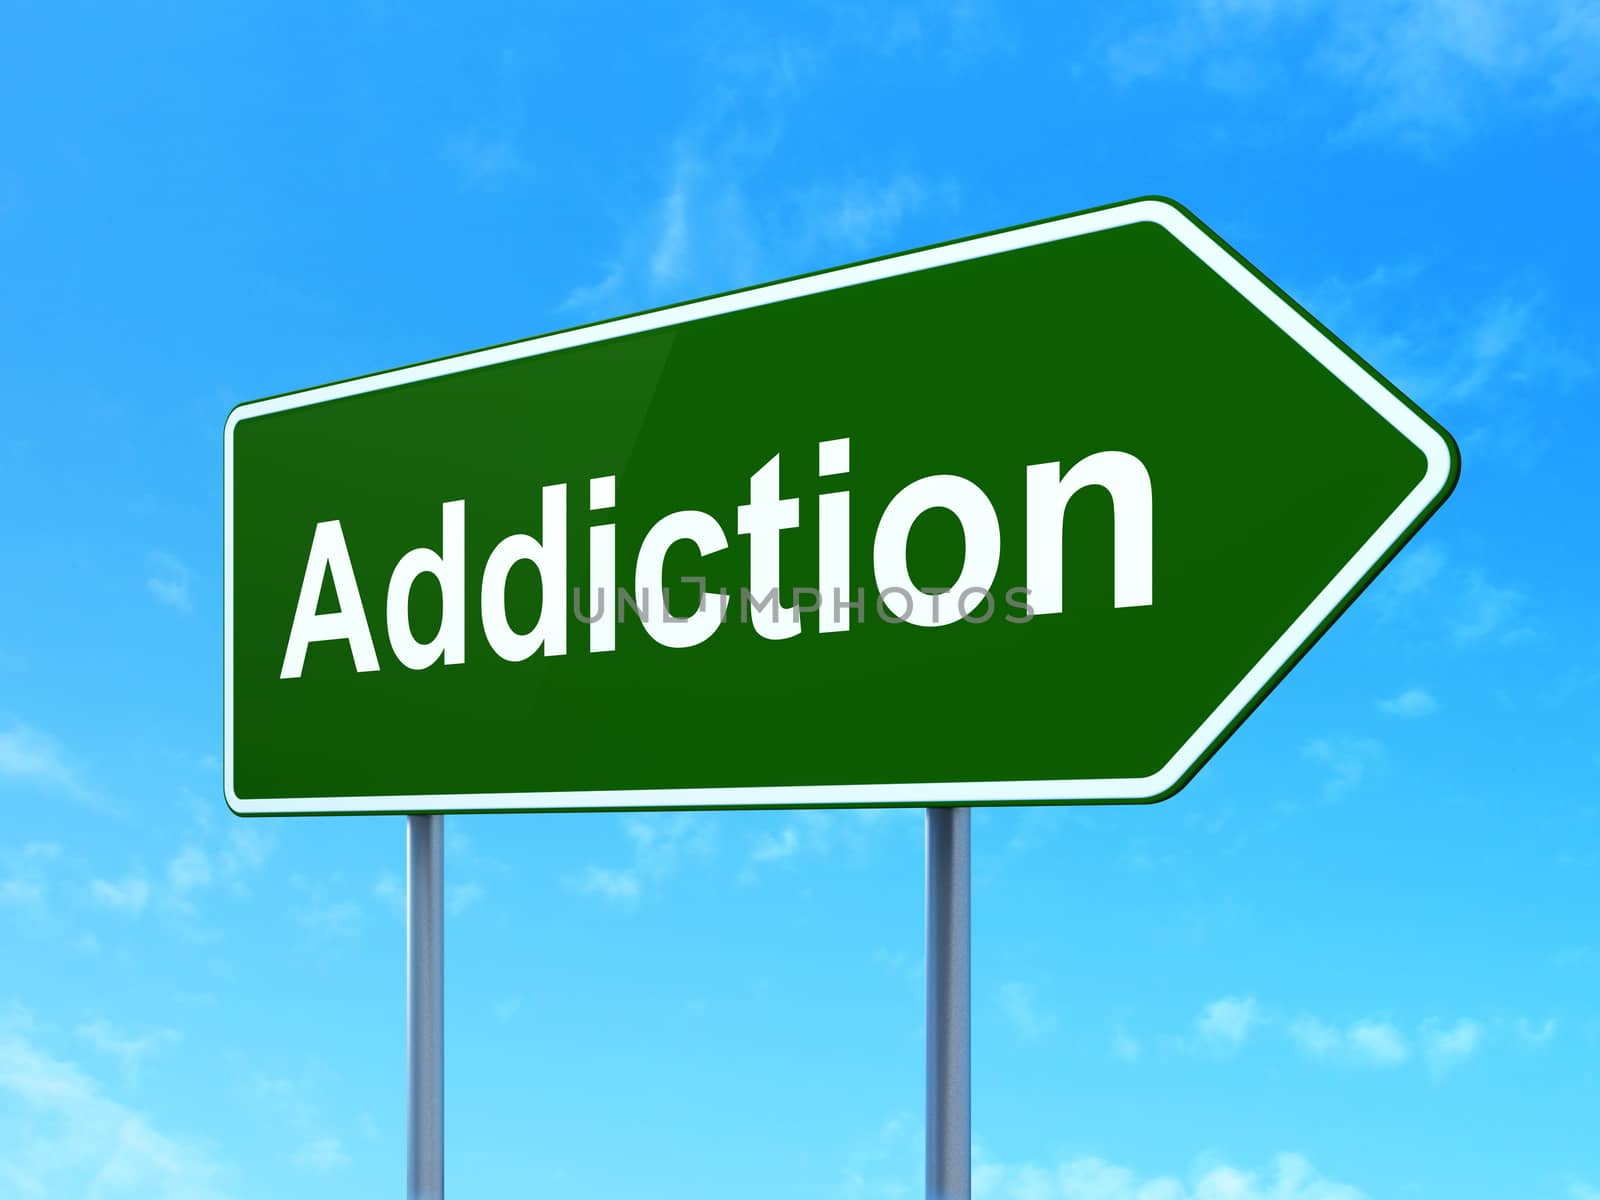 Health concept: Addiction on green road highway sign, clear blue sky background, 3D rendering